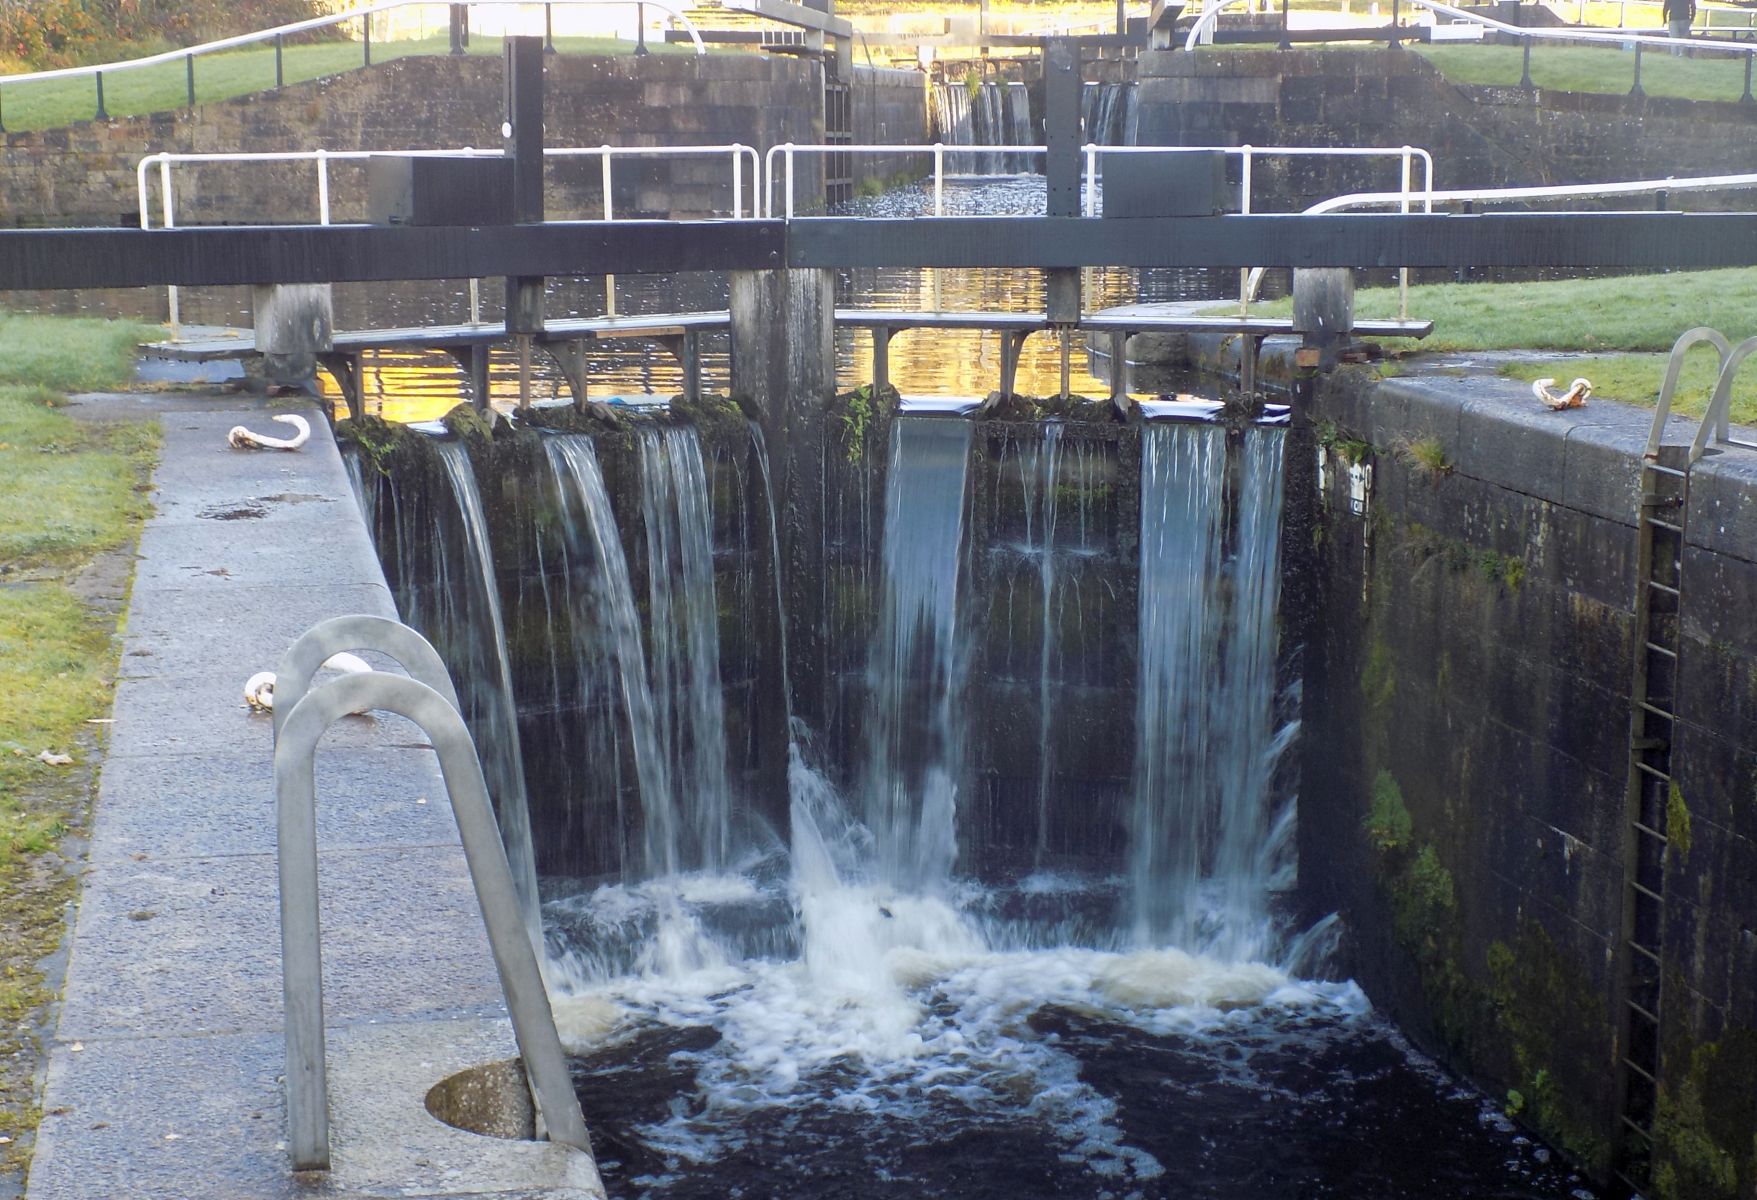 Lock on Forth & Clyde Canal in Maryhill